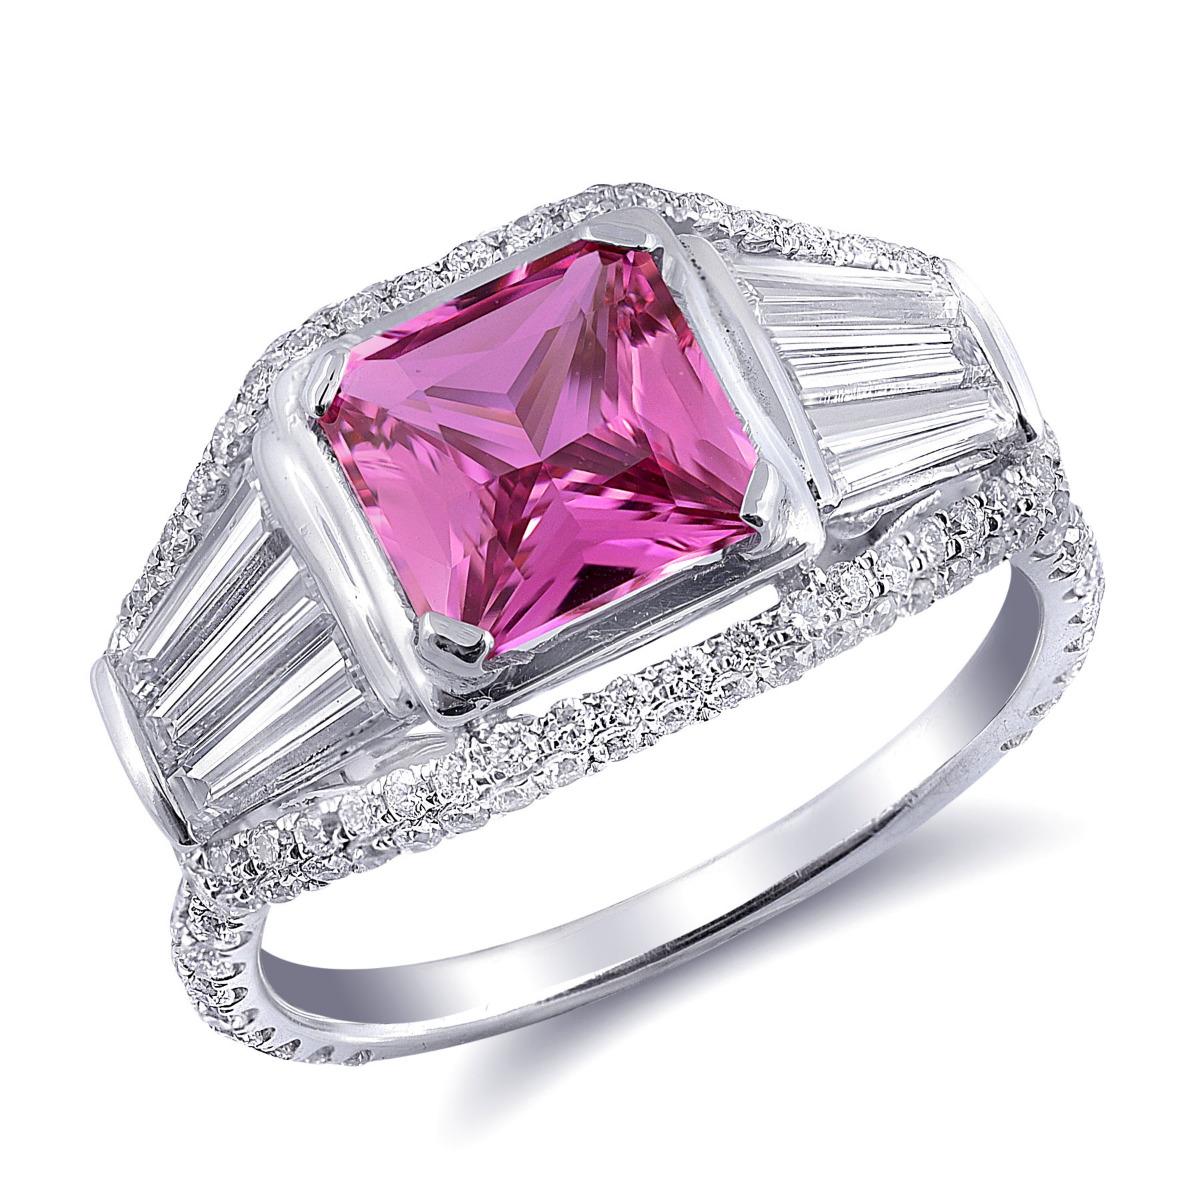 his custom-made ring is an ideal choice for a special moment, featuring a vibrant fuchsia Pink Sapphire at its center. Set within sturdy prongs, this pink sapphire is not only visually stunning but also durable enough to withstand wear and tear. The